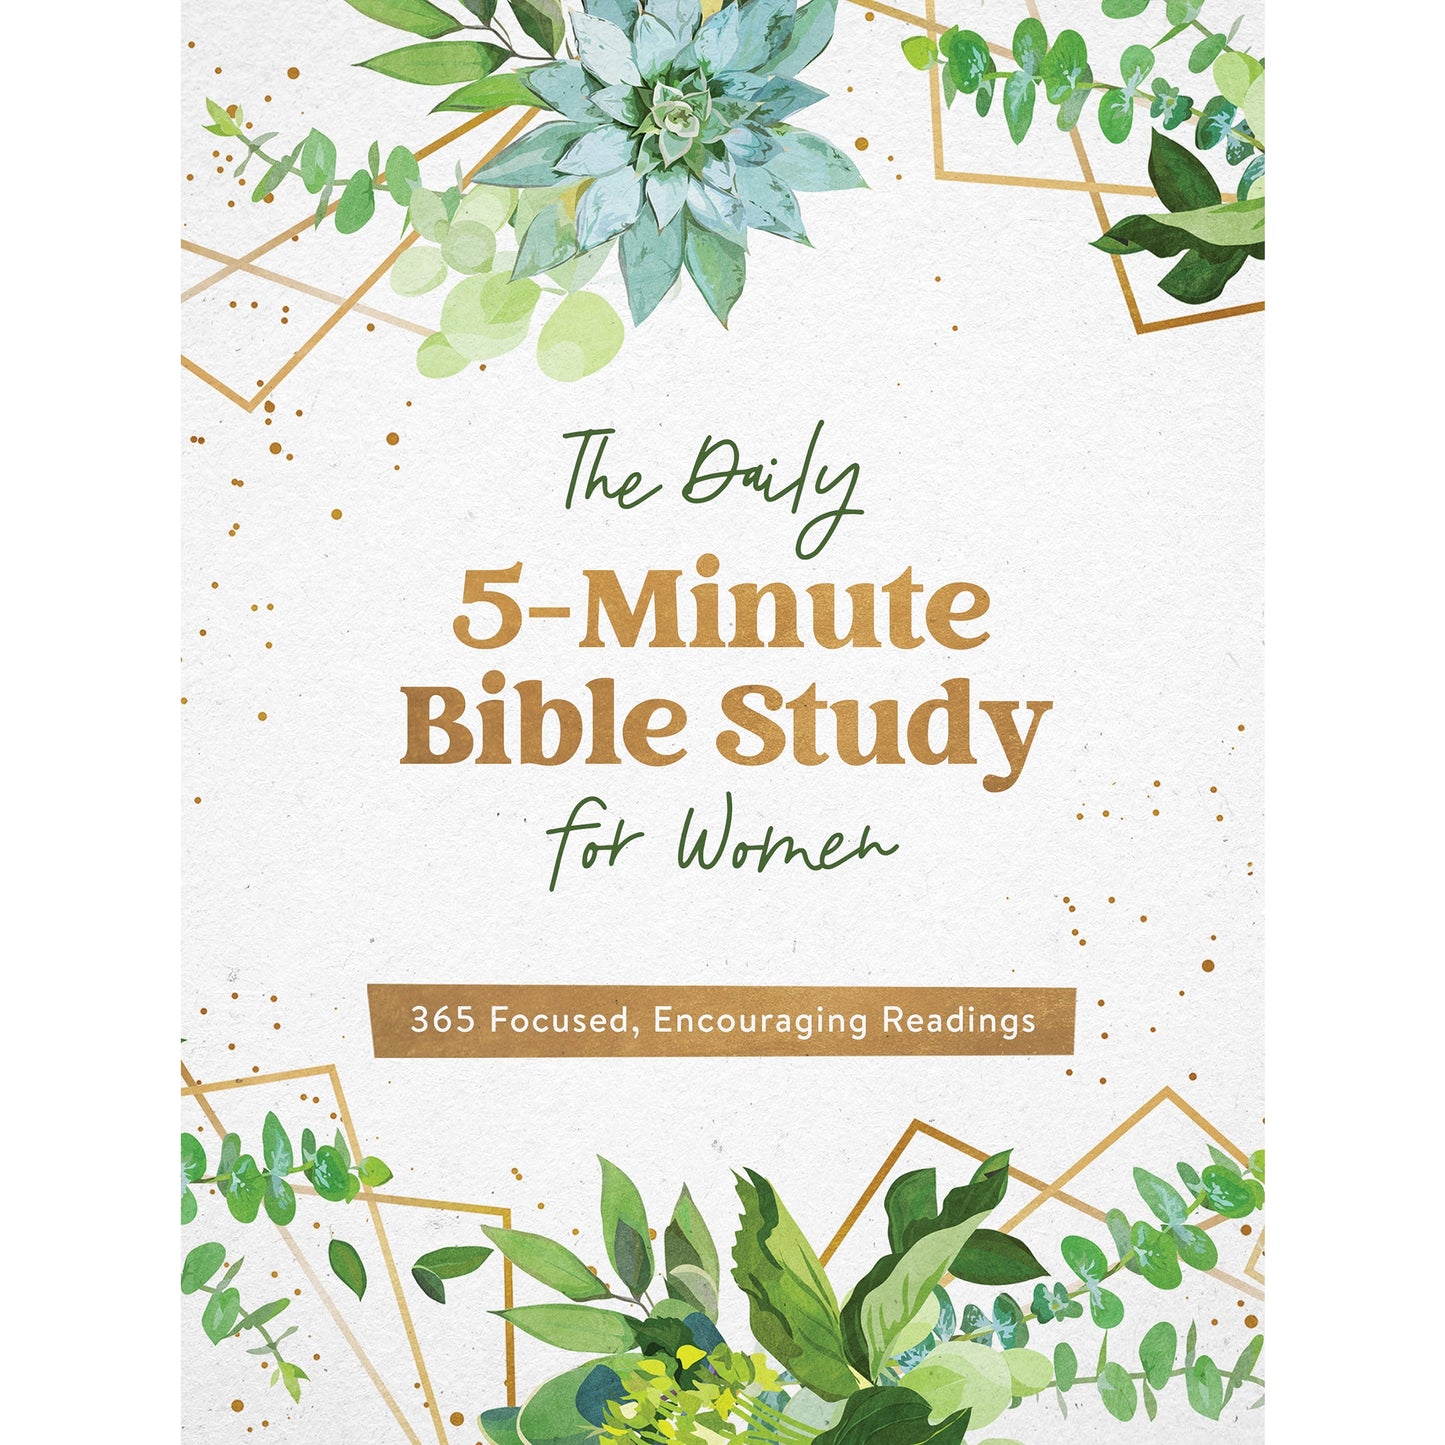 The Daily 5-Minute Bible Study